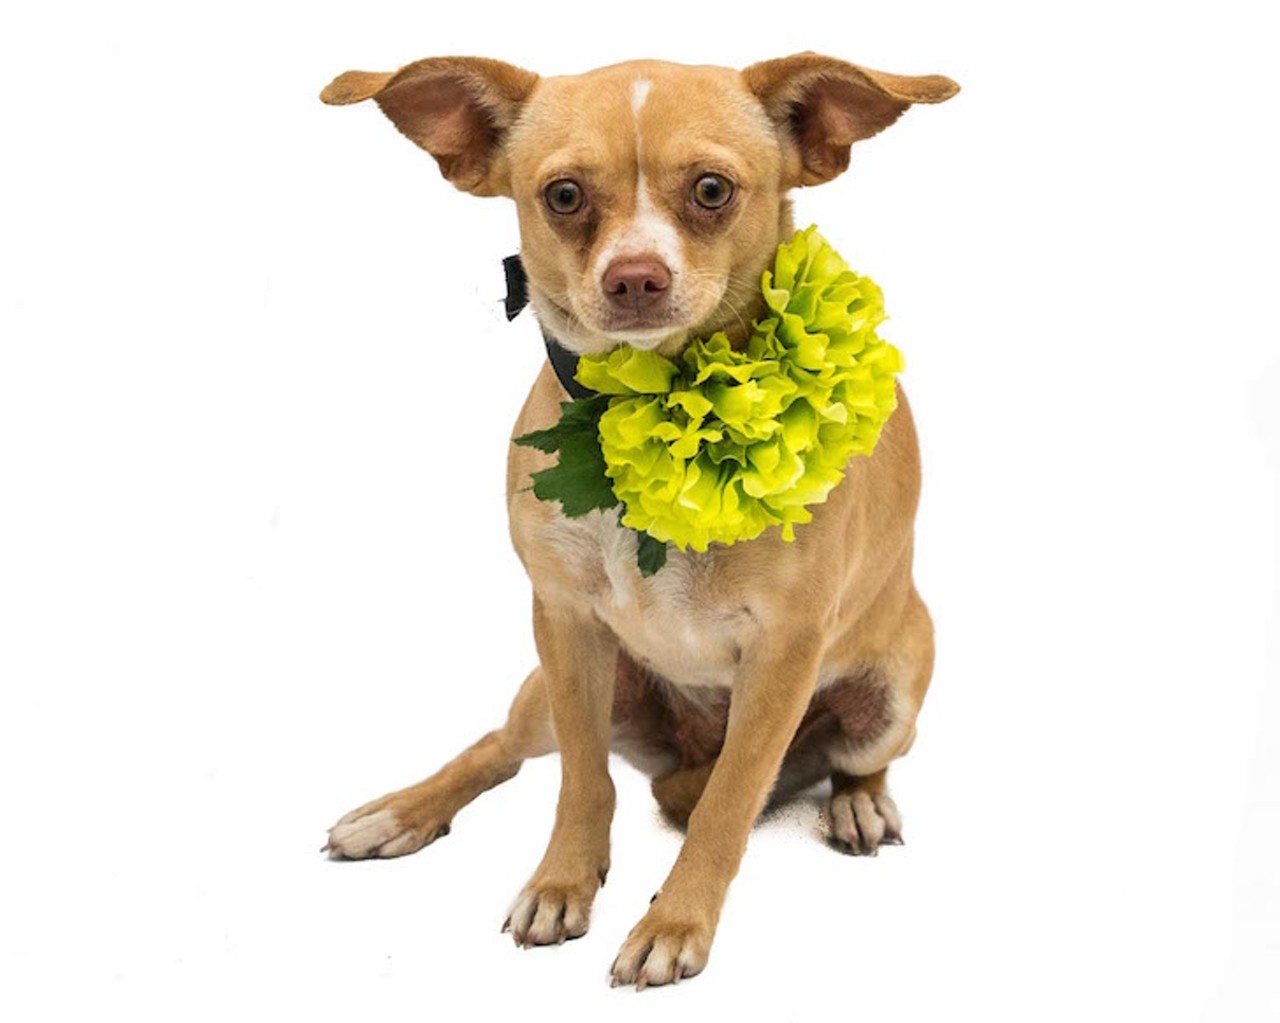 17 adoptable dogs looking for a little luck o' the Irish